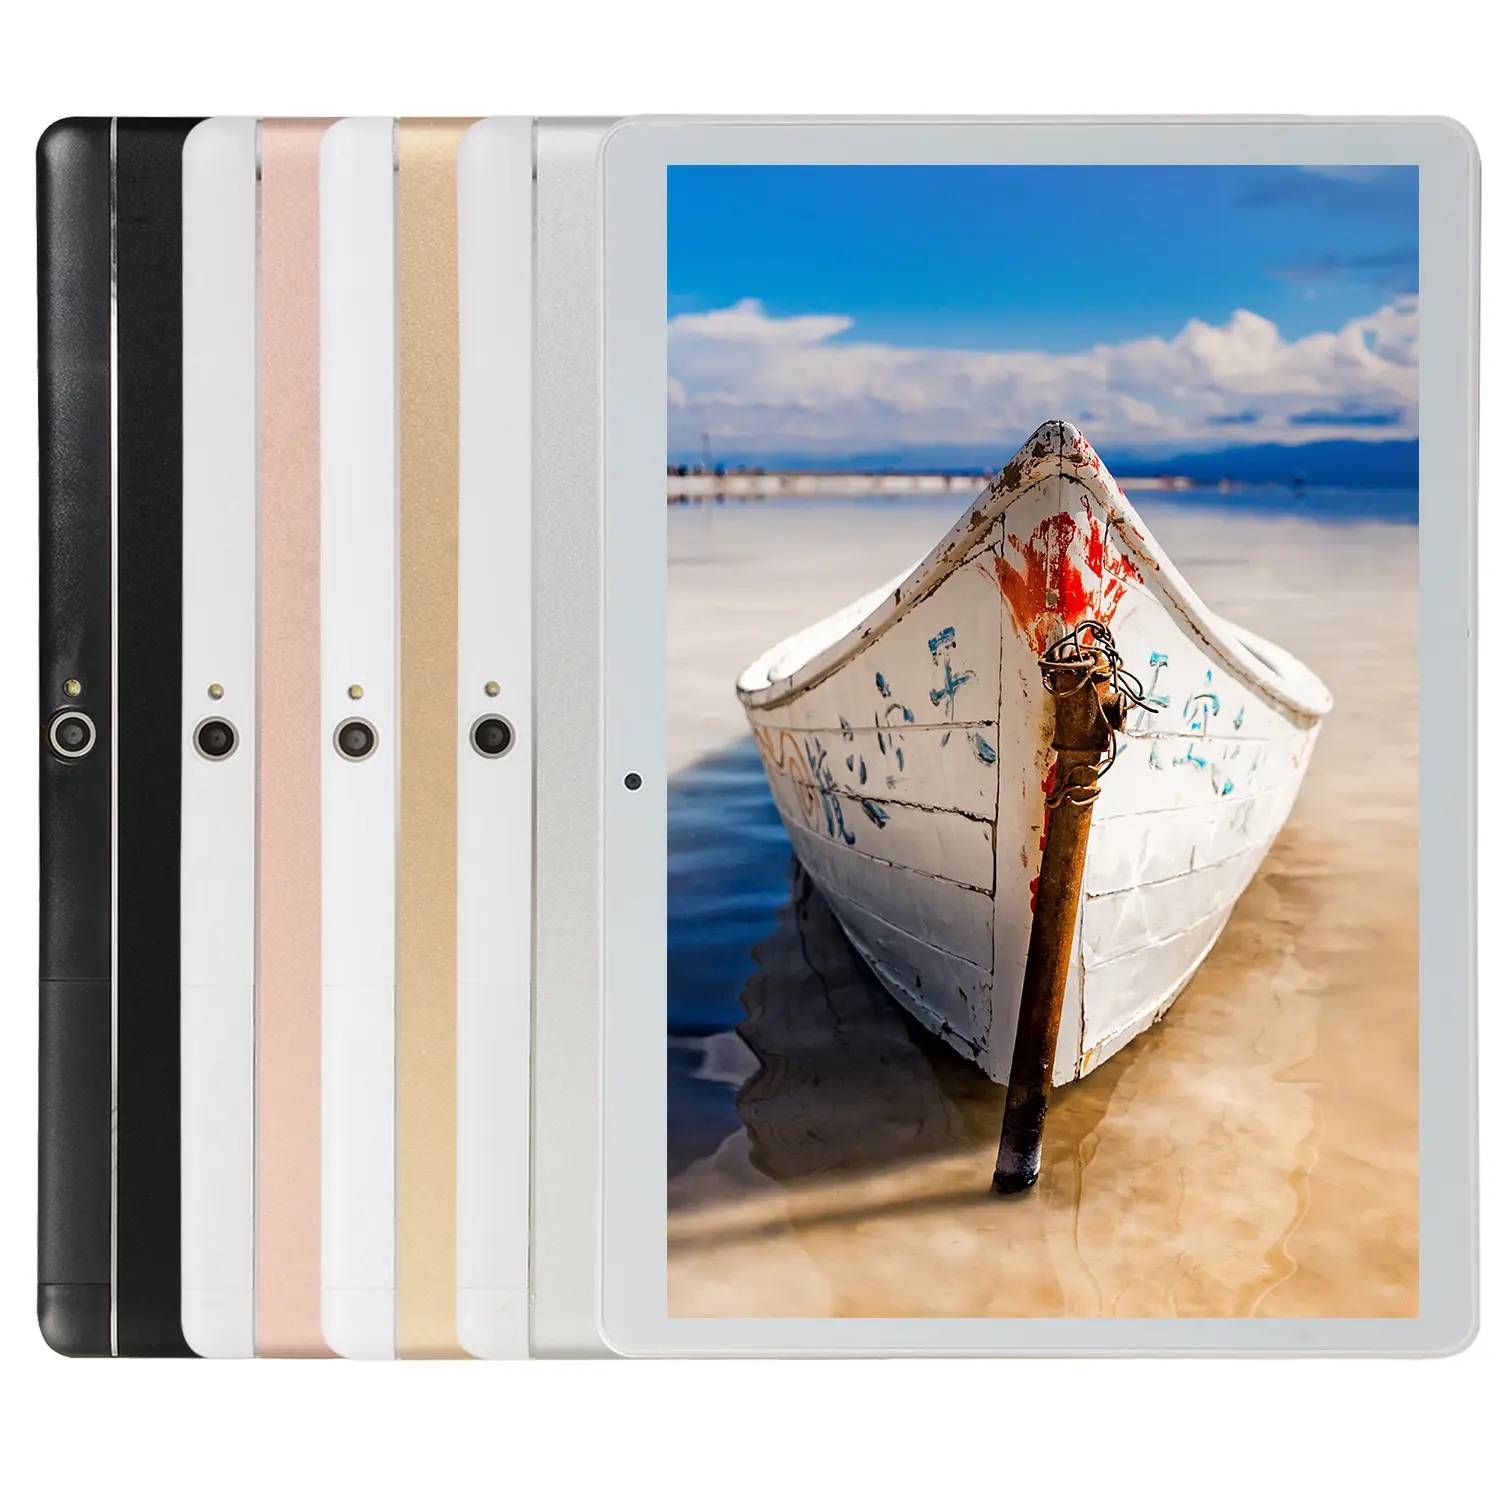 10.1 inch android quad core 16gb tablets 10.1 inch with cheap price 3g portable tablets ready goods